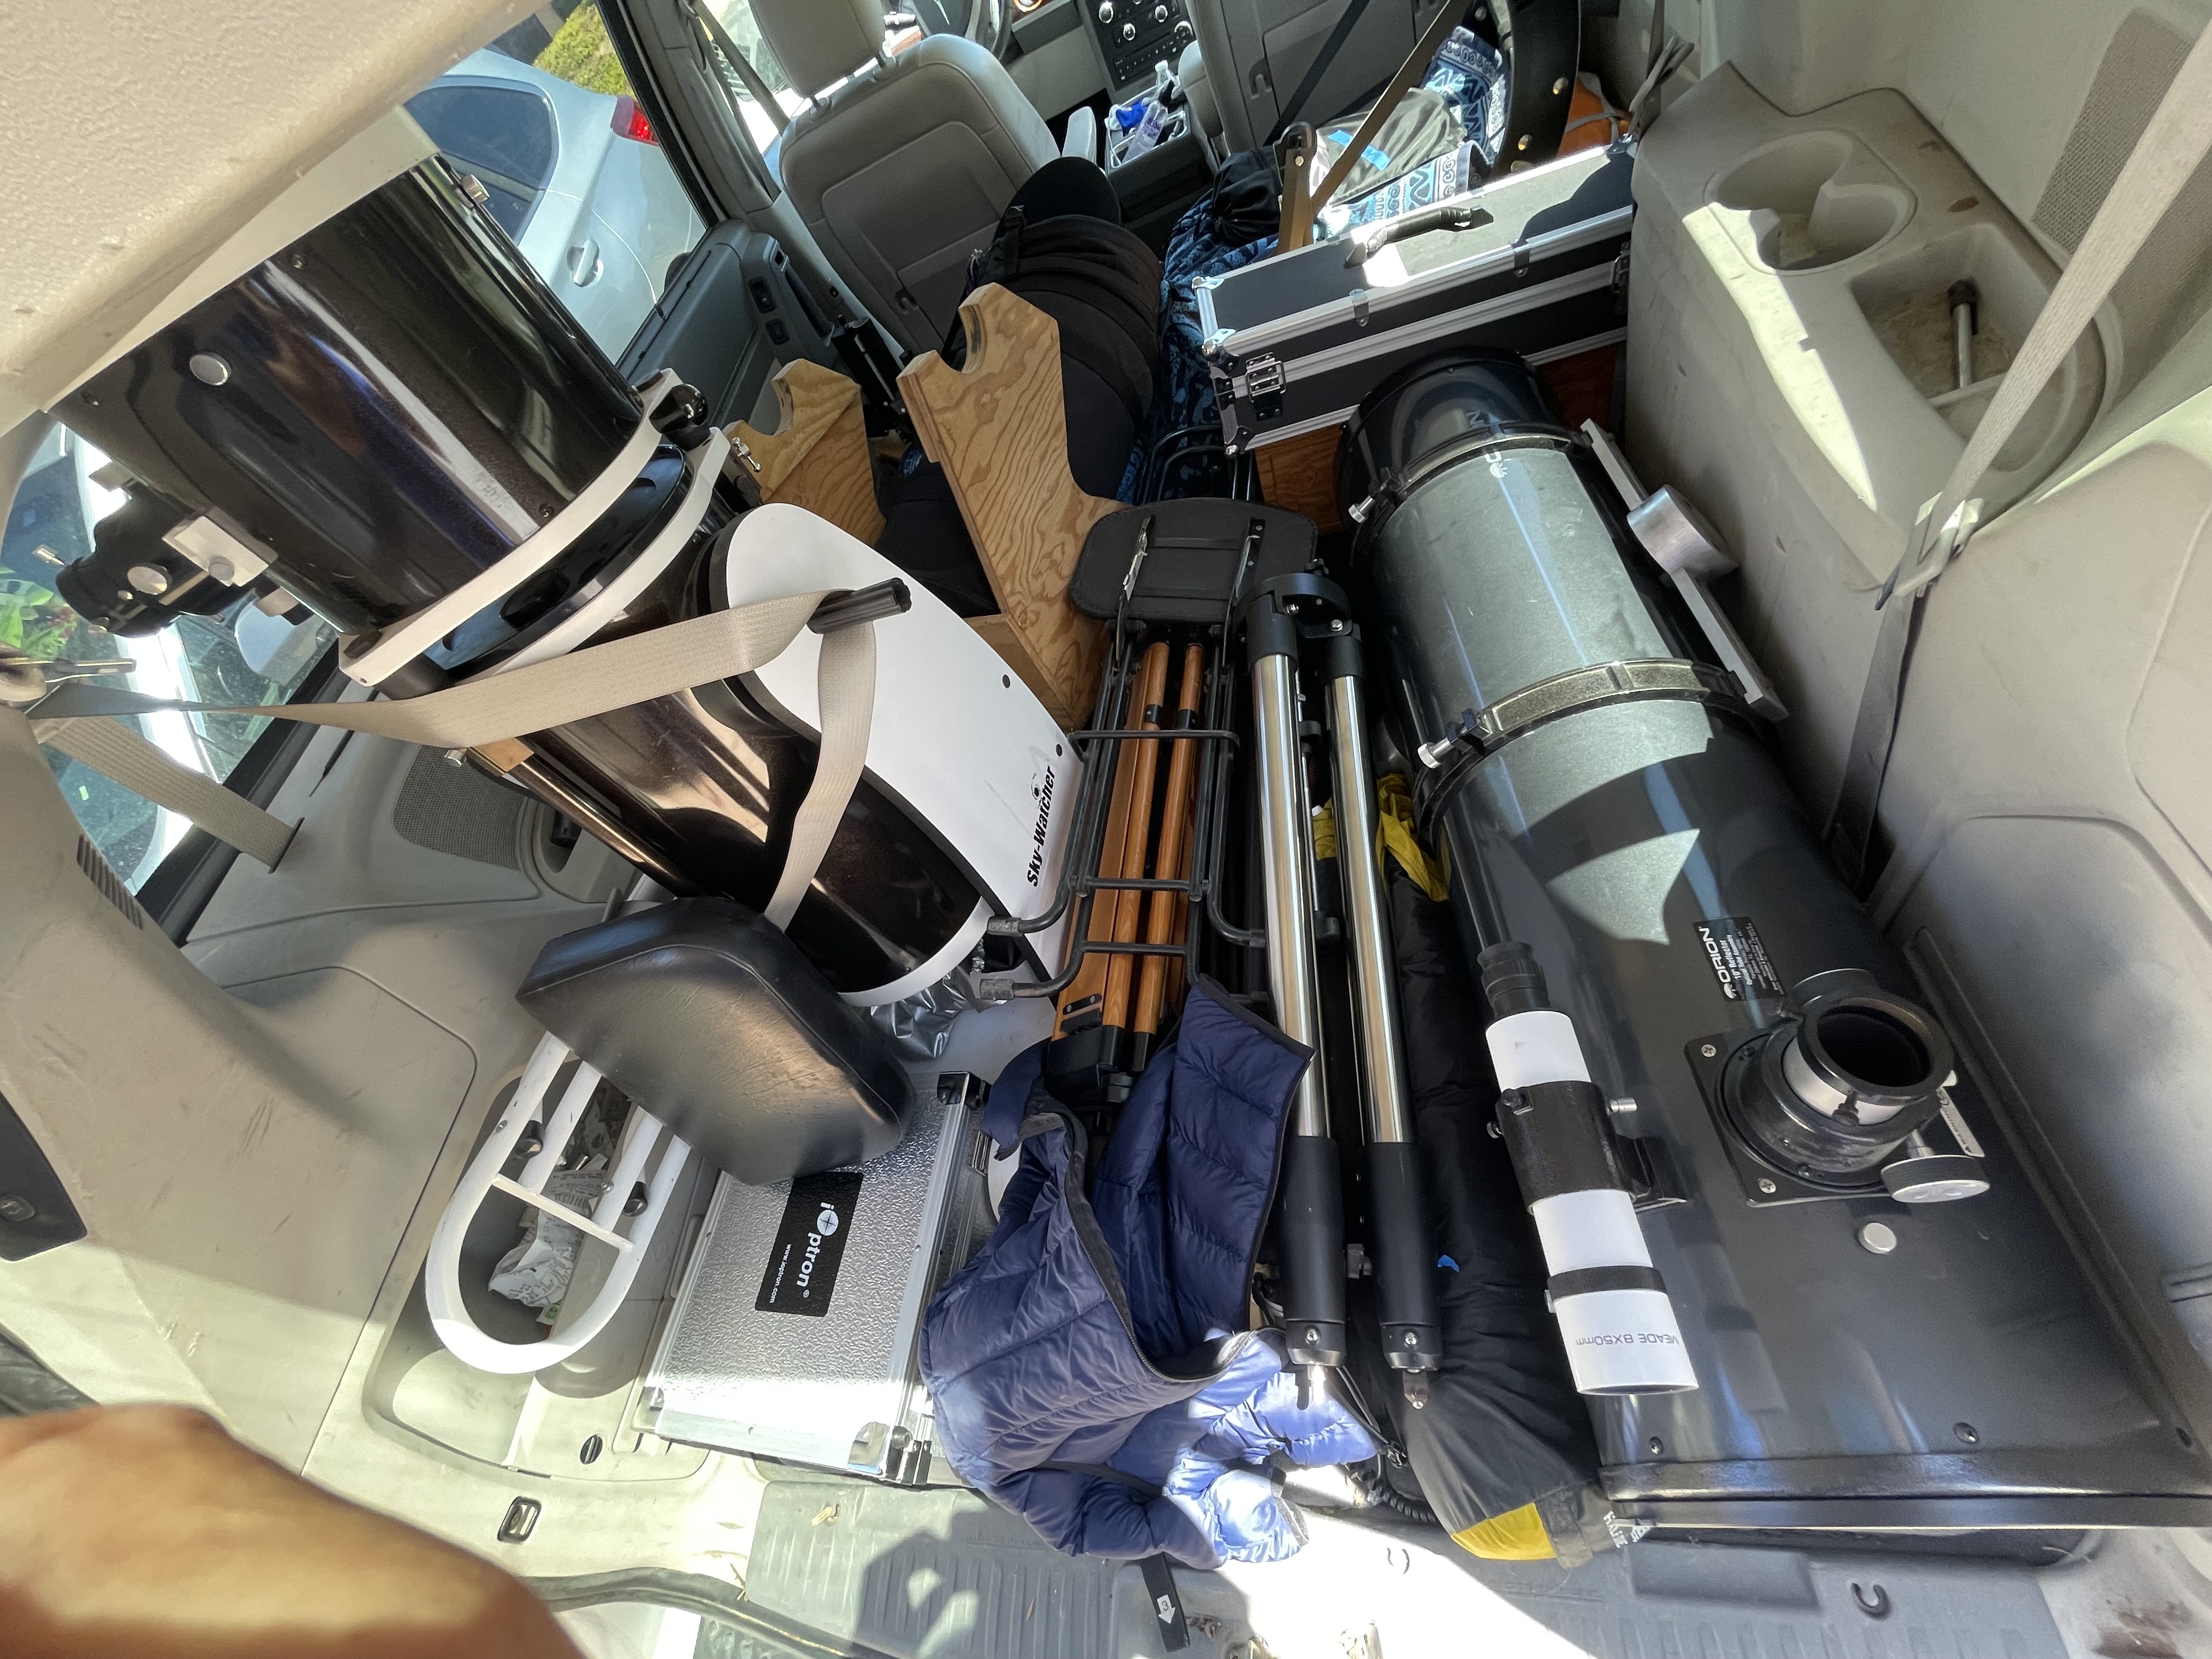 The Van Packed with Scopes